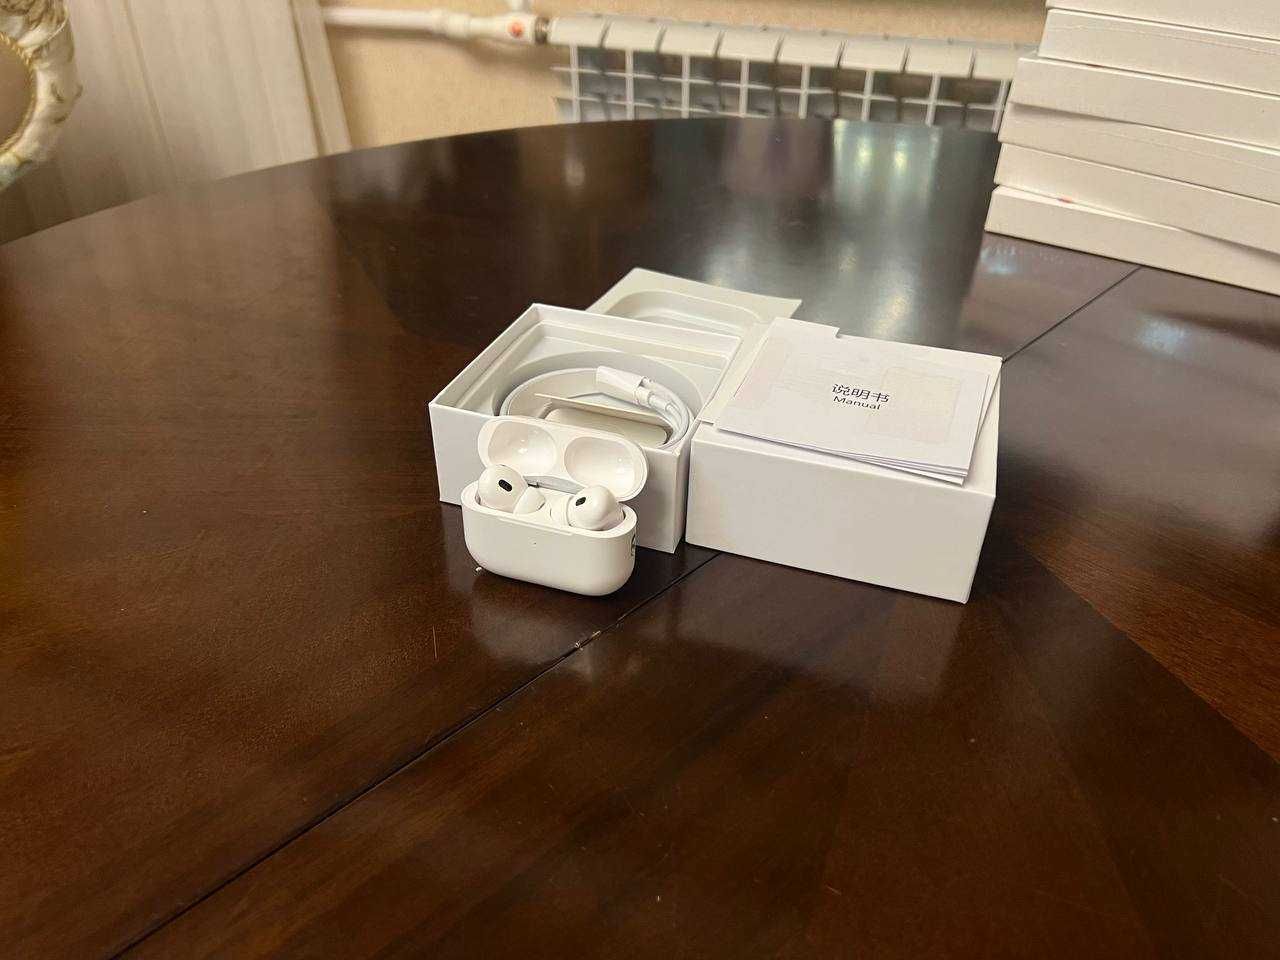 AirPods 2 LUXE качества